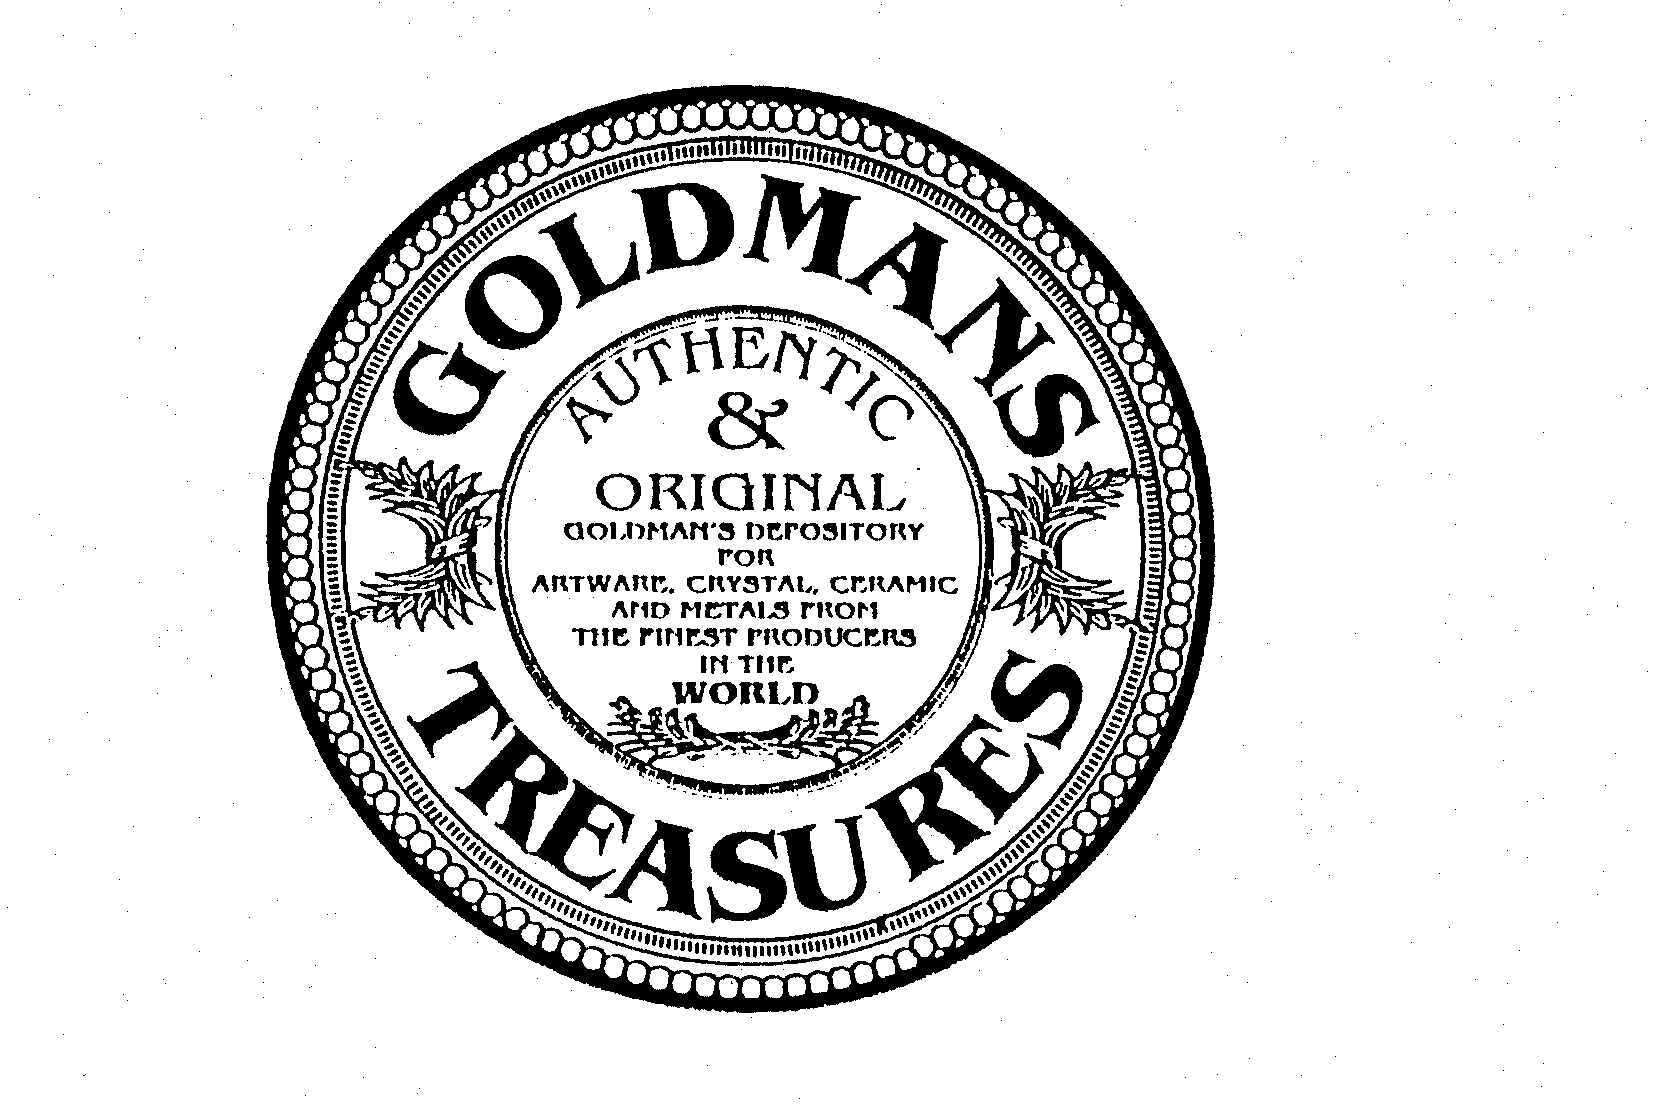  GOLDMANS TREASURES AUTHENTIC &amp; ORIGINALGOLDMAN'S DEPOSITORY FOR ARTWARE, CRYSTAL, CERAMIC AND METALS FROM THE FINEST PRODUCE